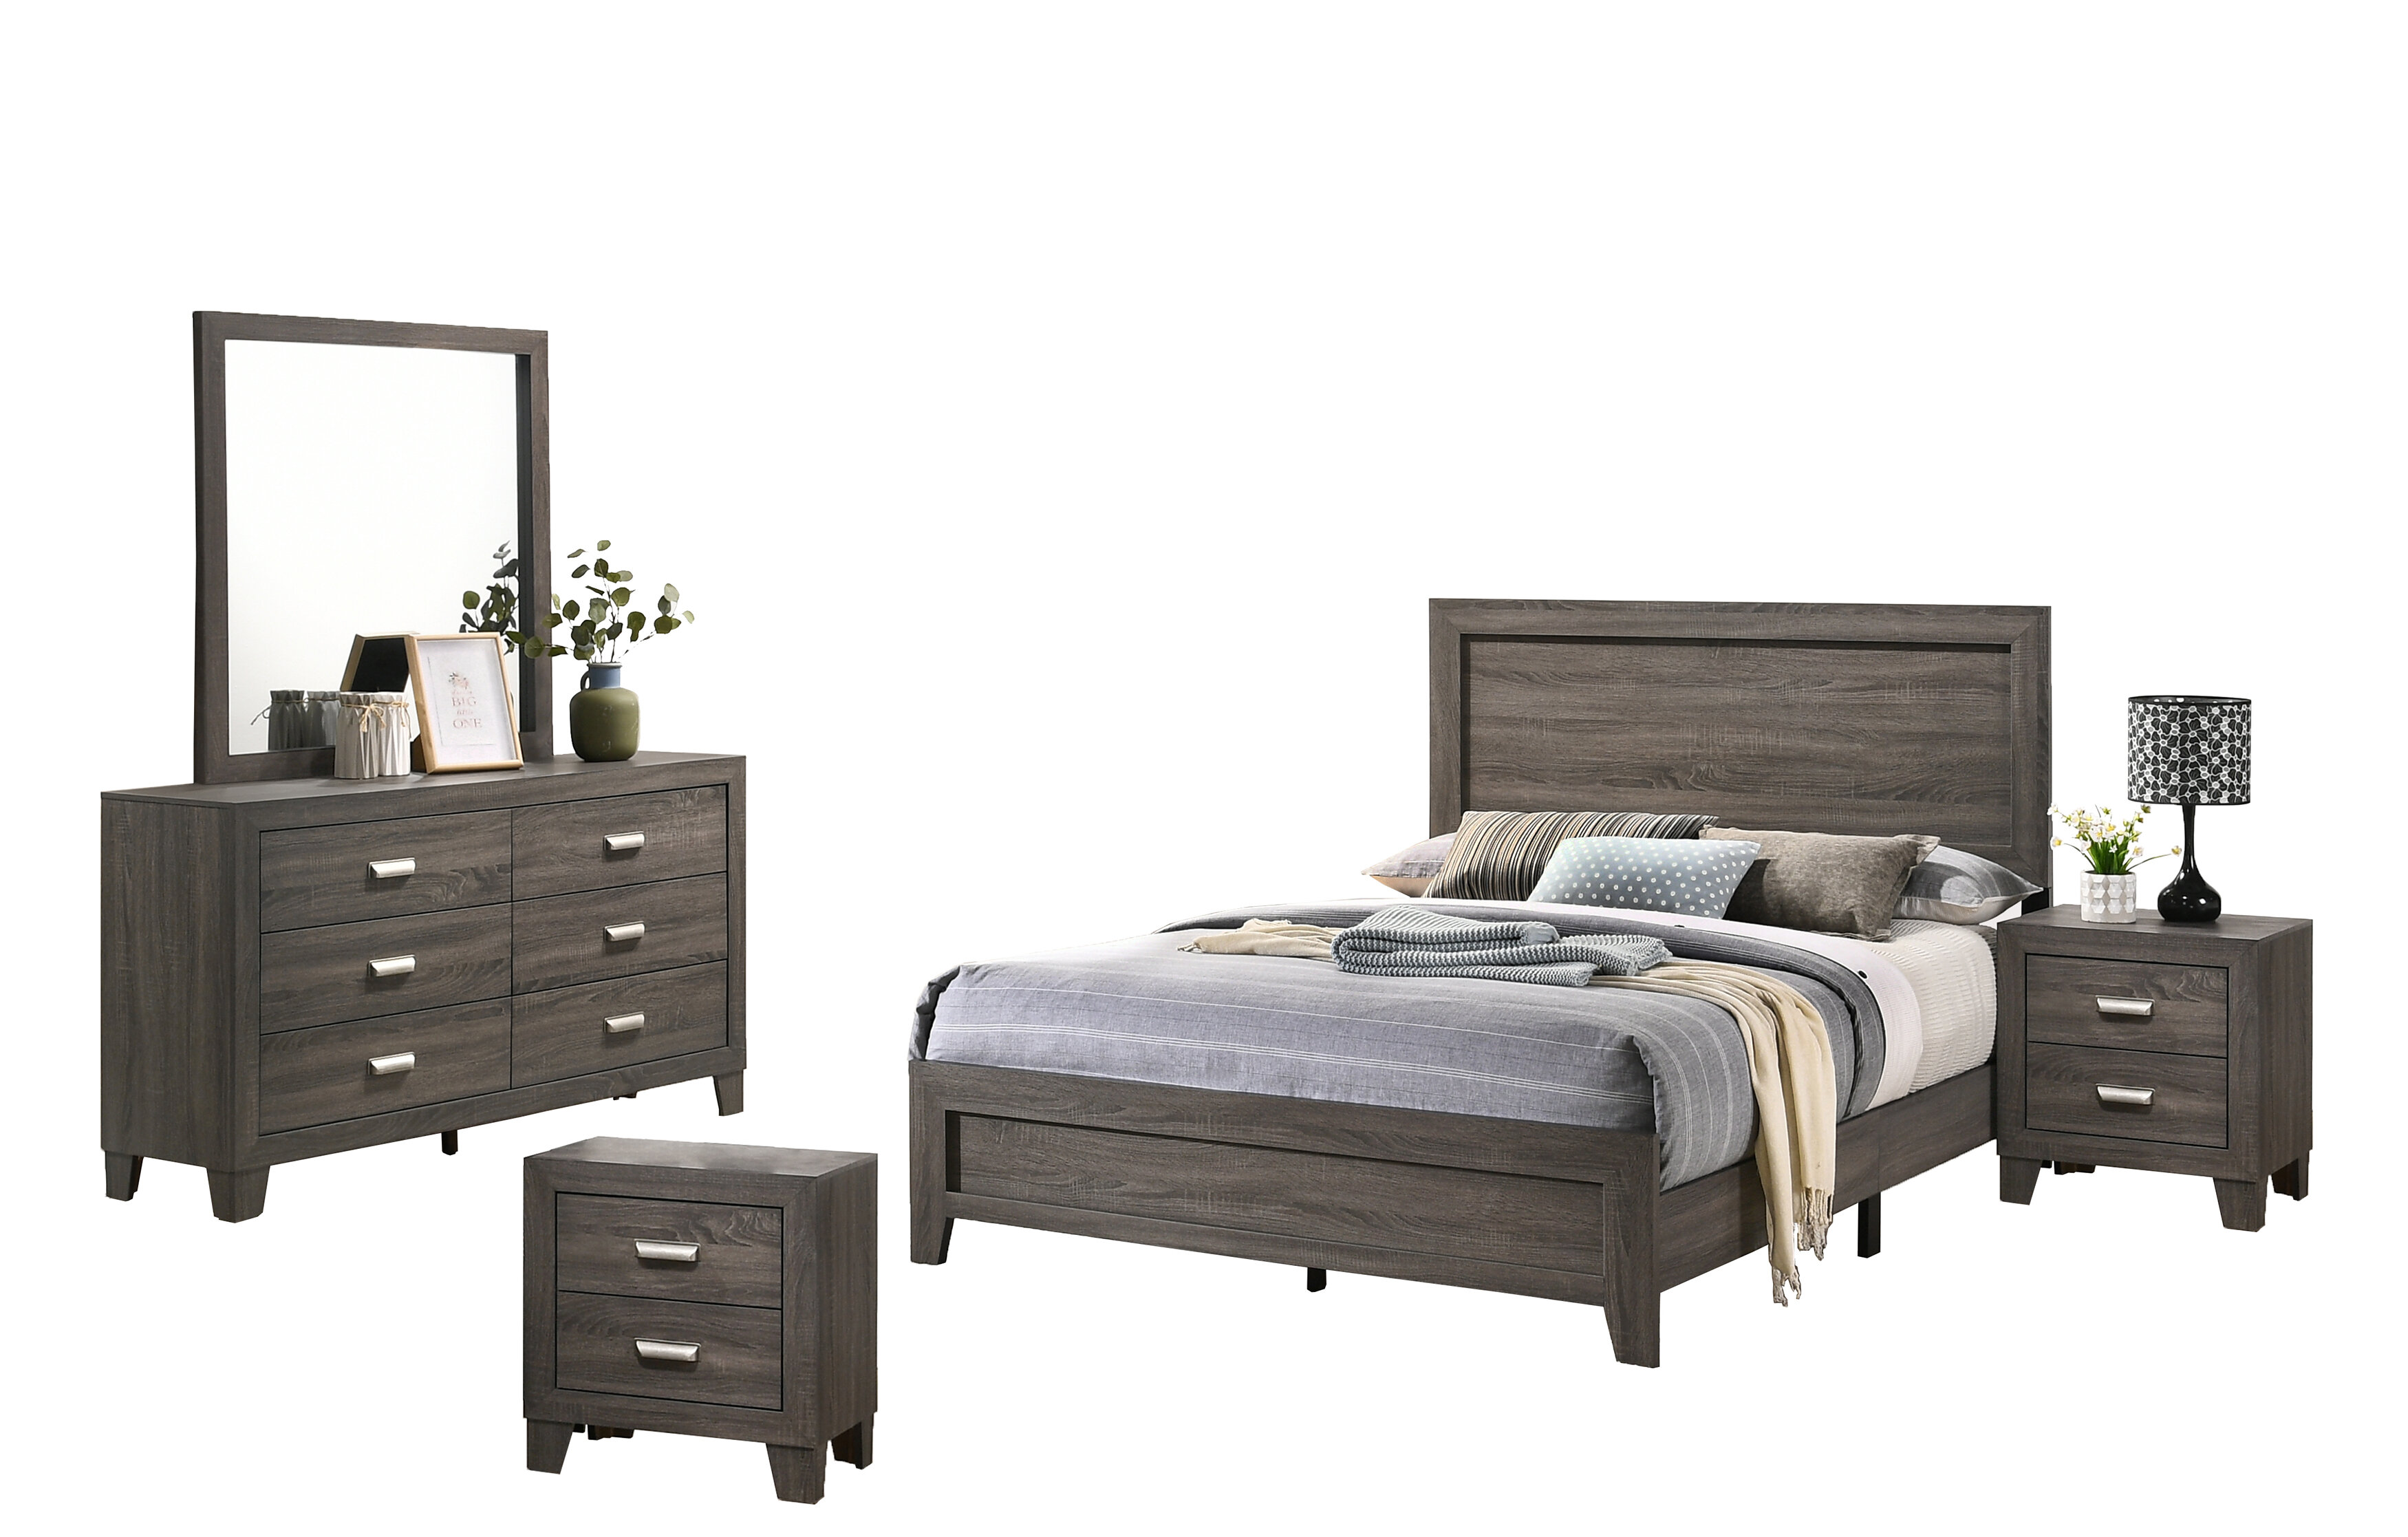 King Modern Contemporary Bedroom Sets Free Shipping Over 35 Wayfair